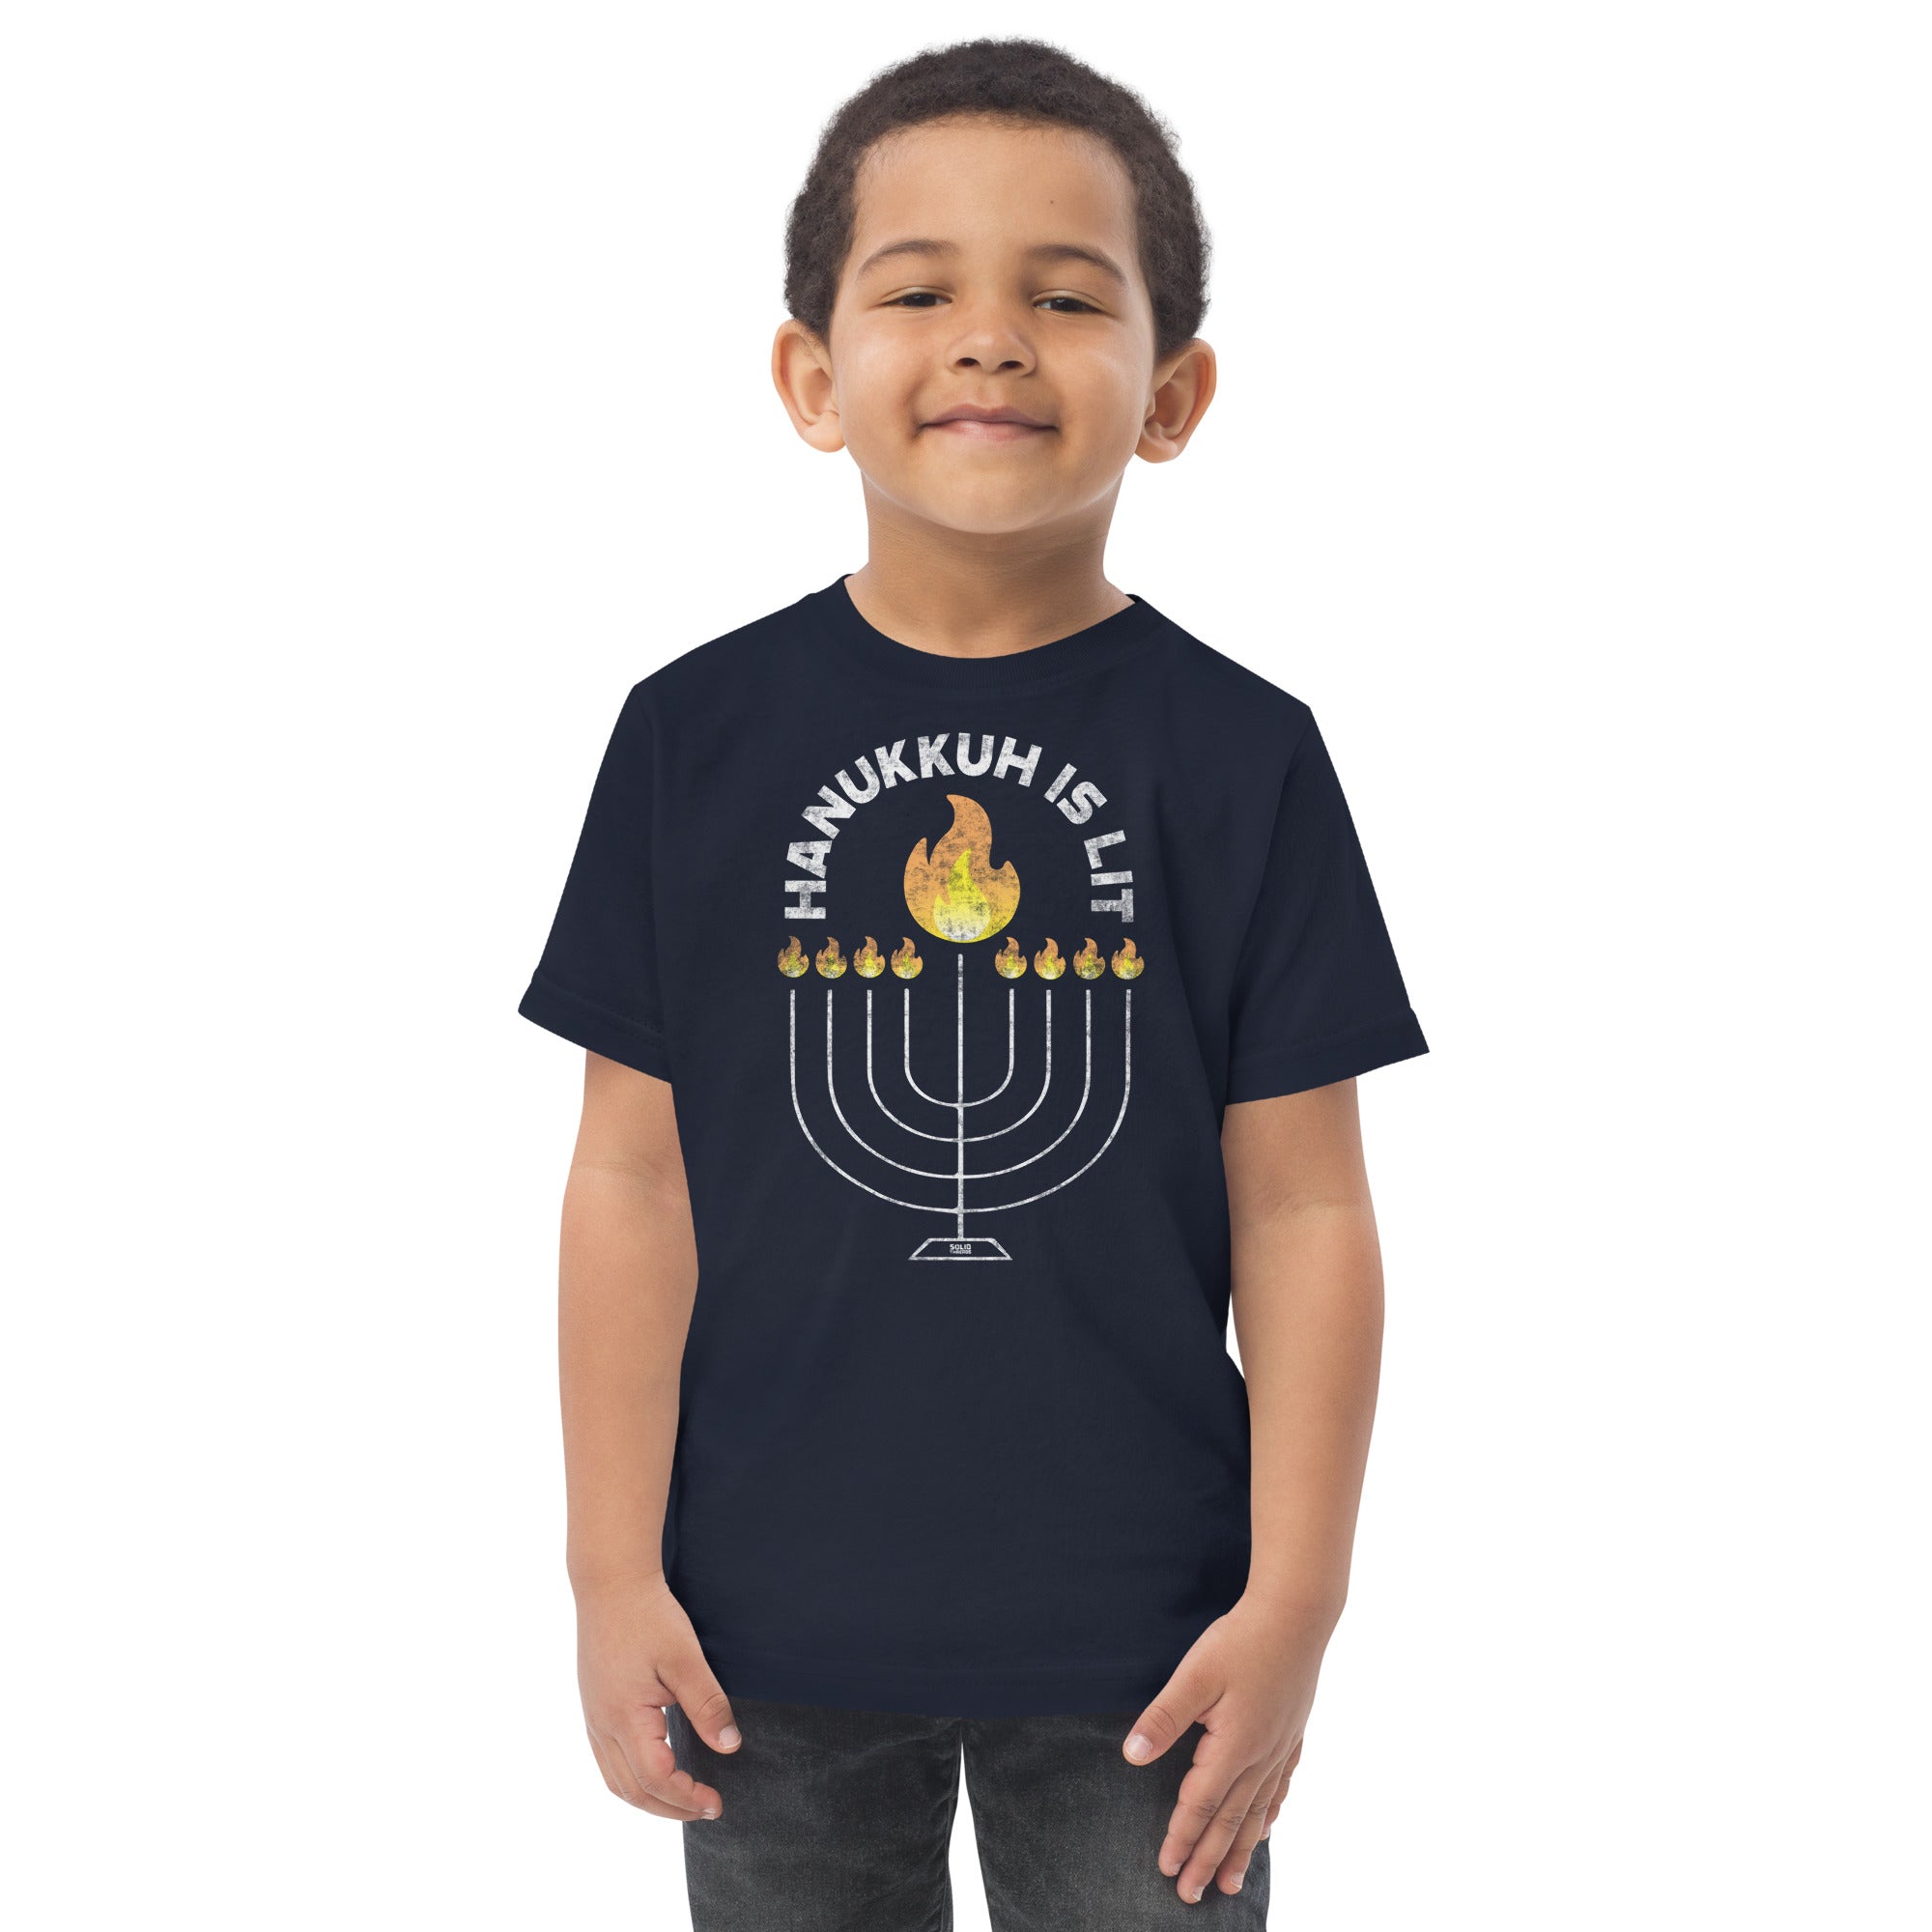 Toddler's Hanukkah Lit Cool Extra Soft T-Shirt | Retro Jewish Holiday Tee  | Solid Threads